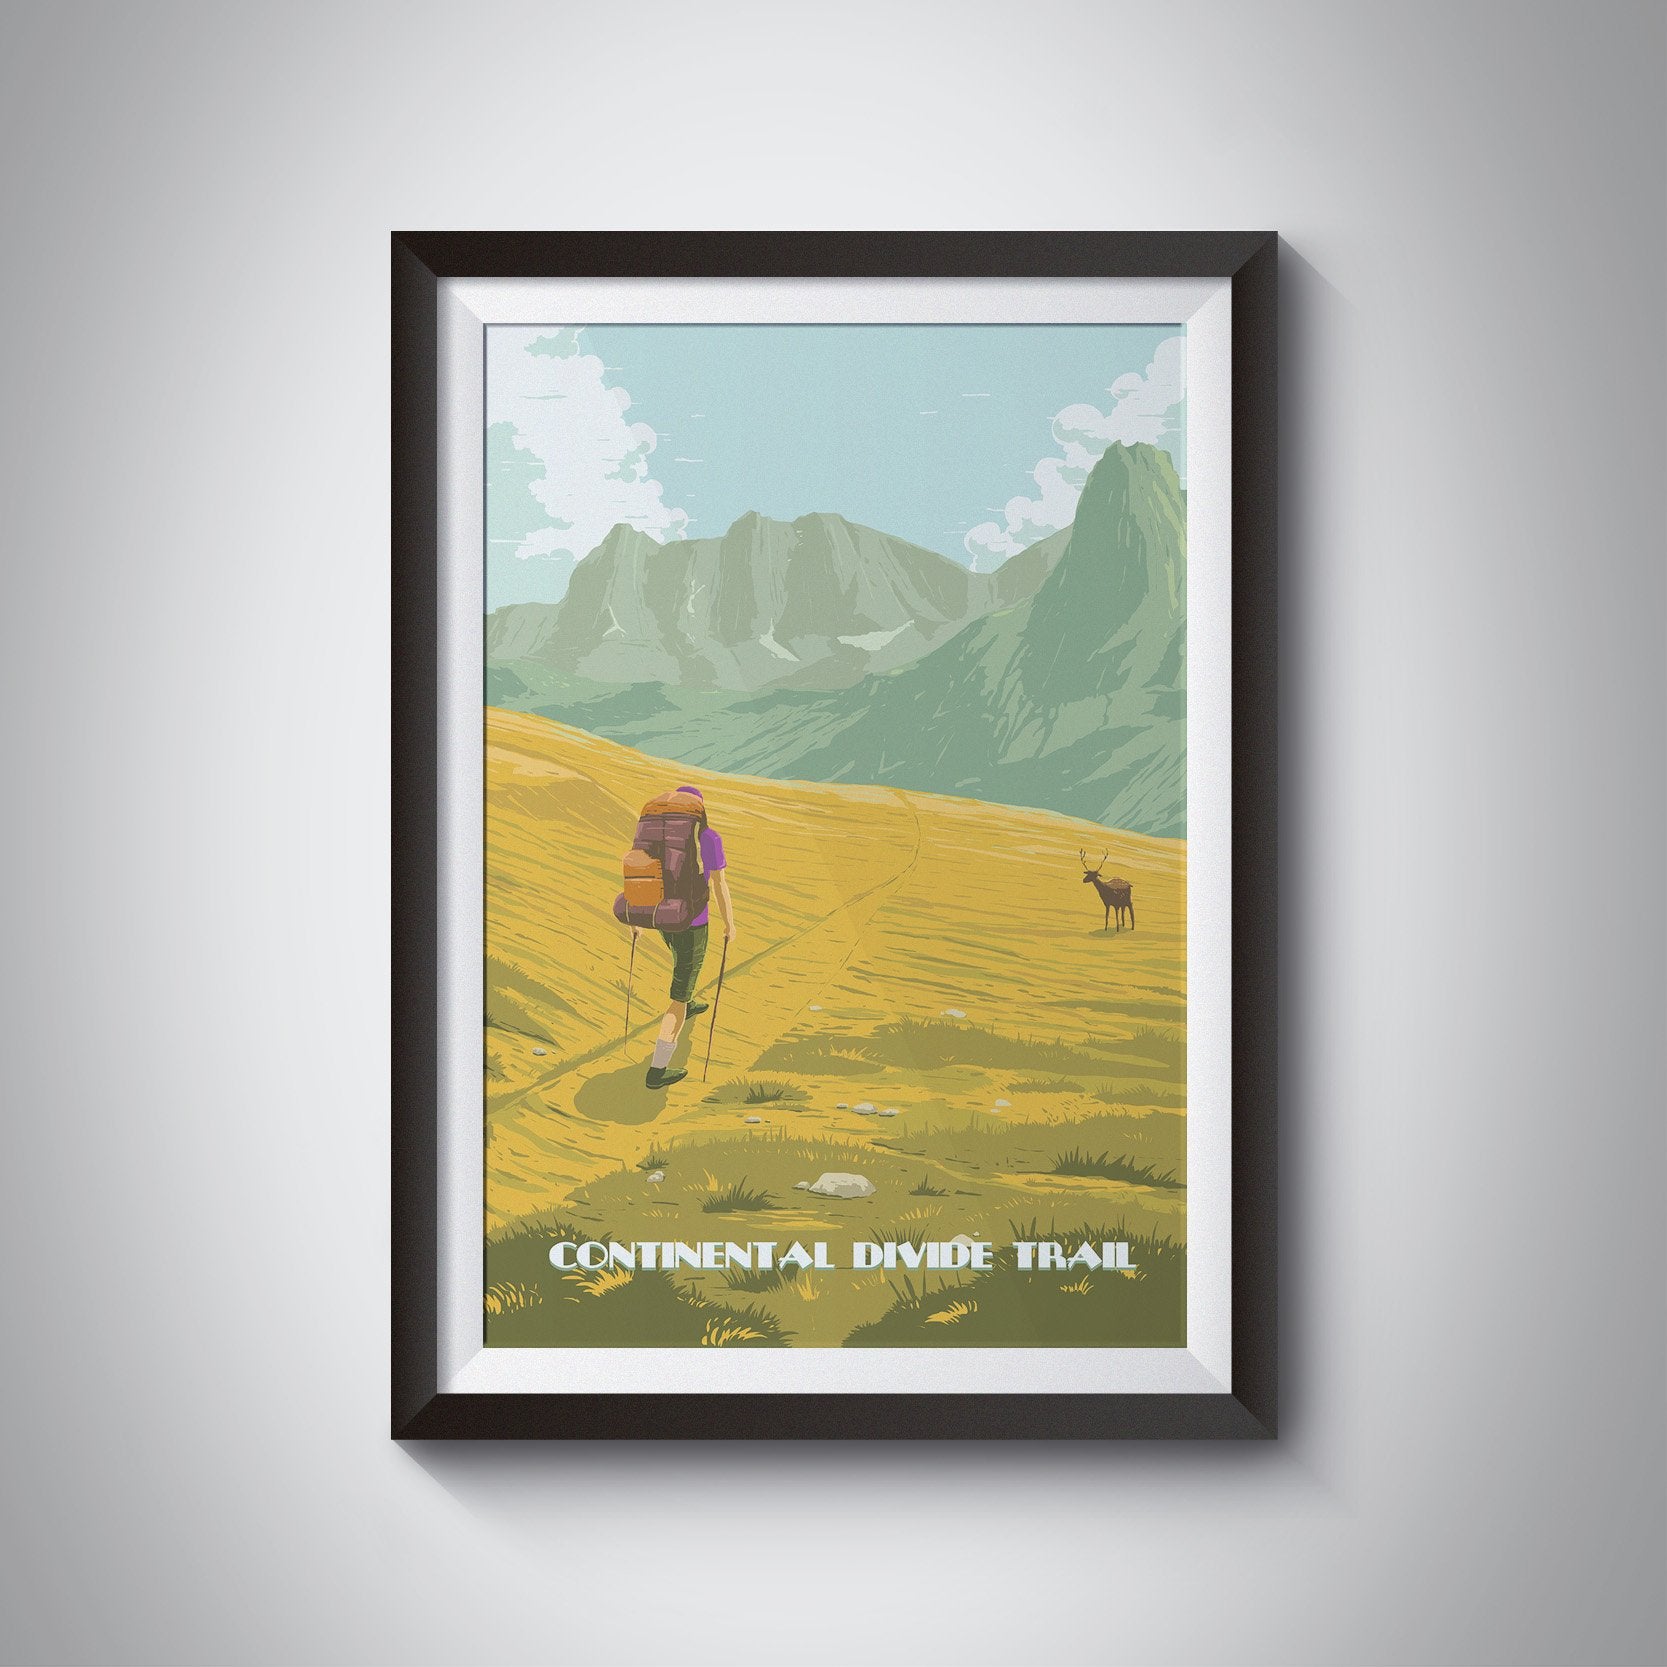 Continental Divide Trail Travel Poster